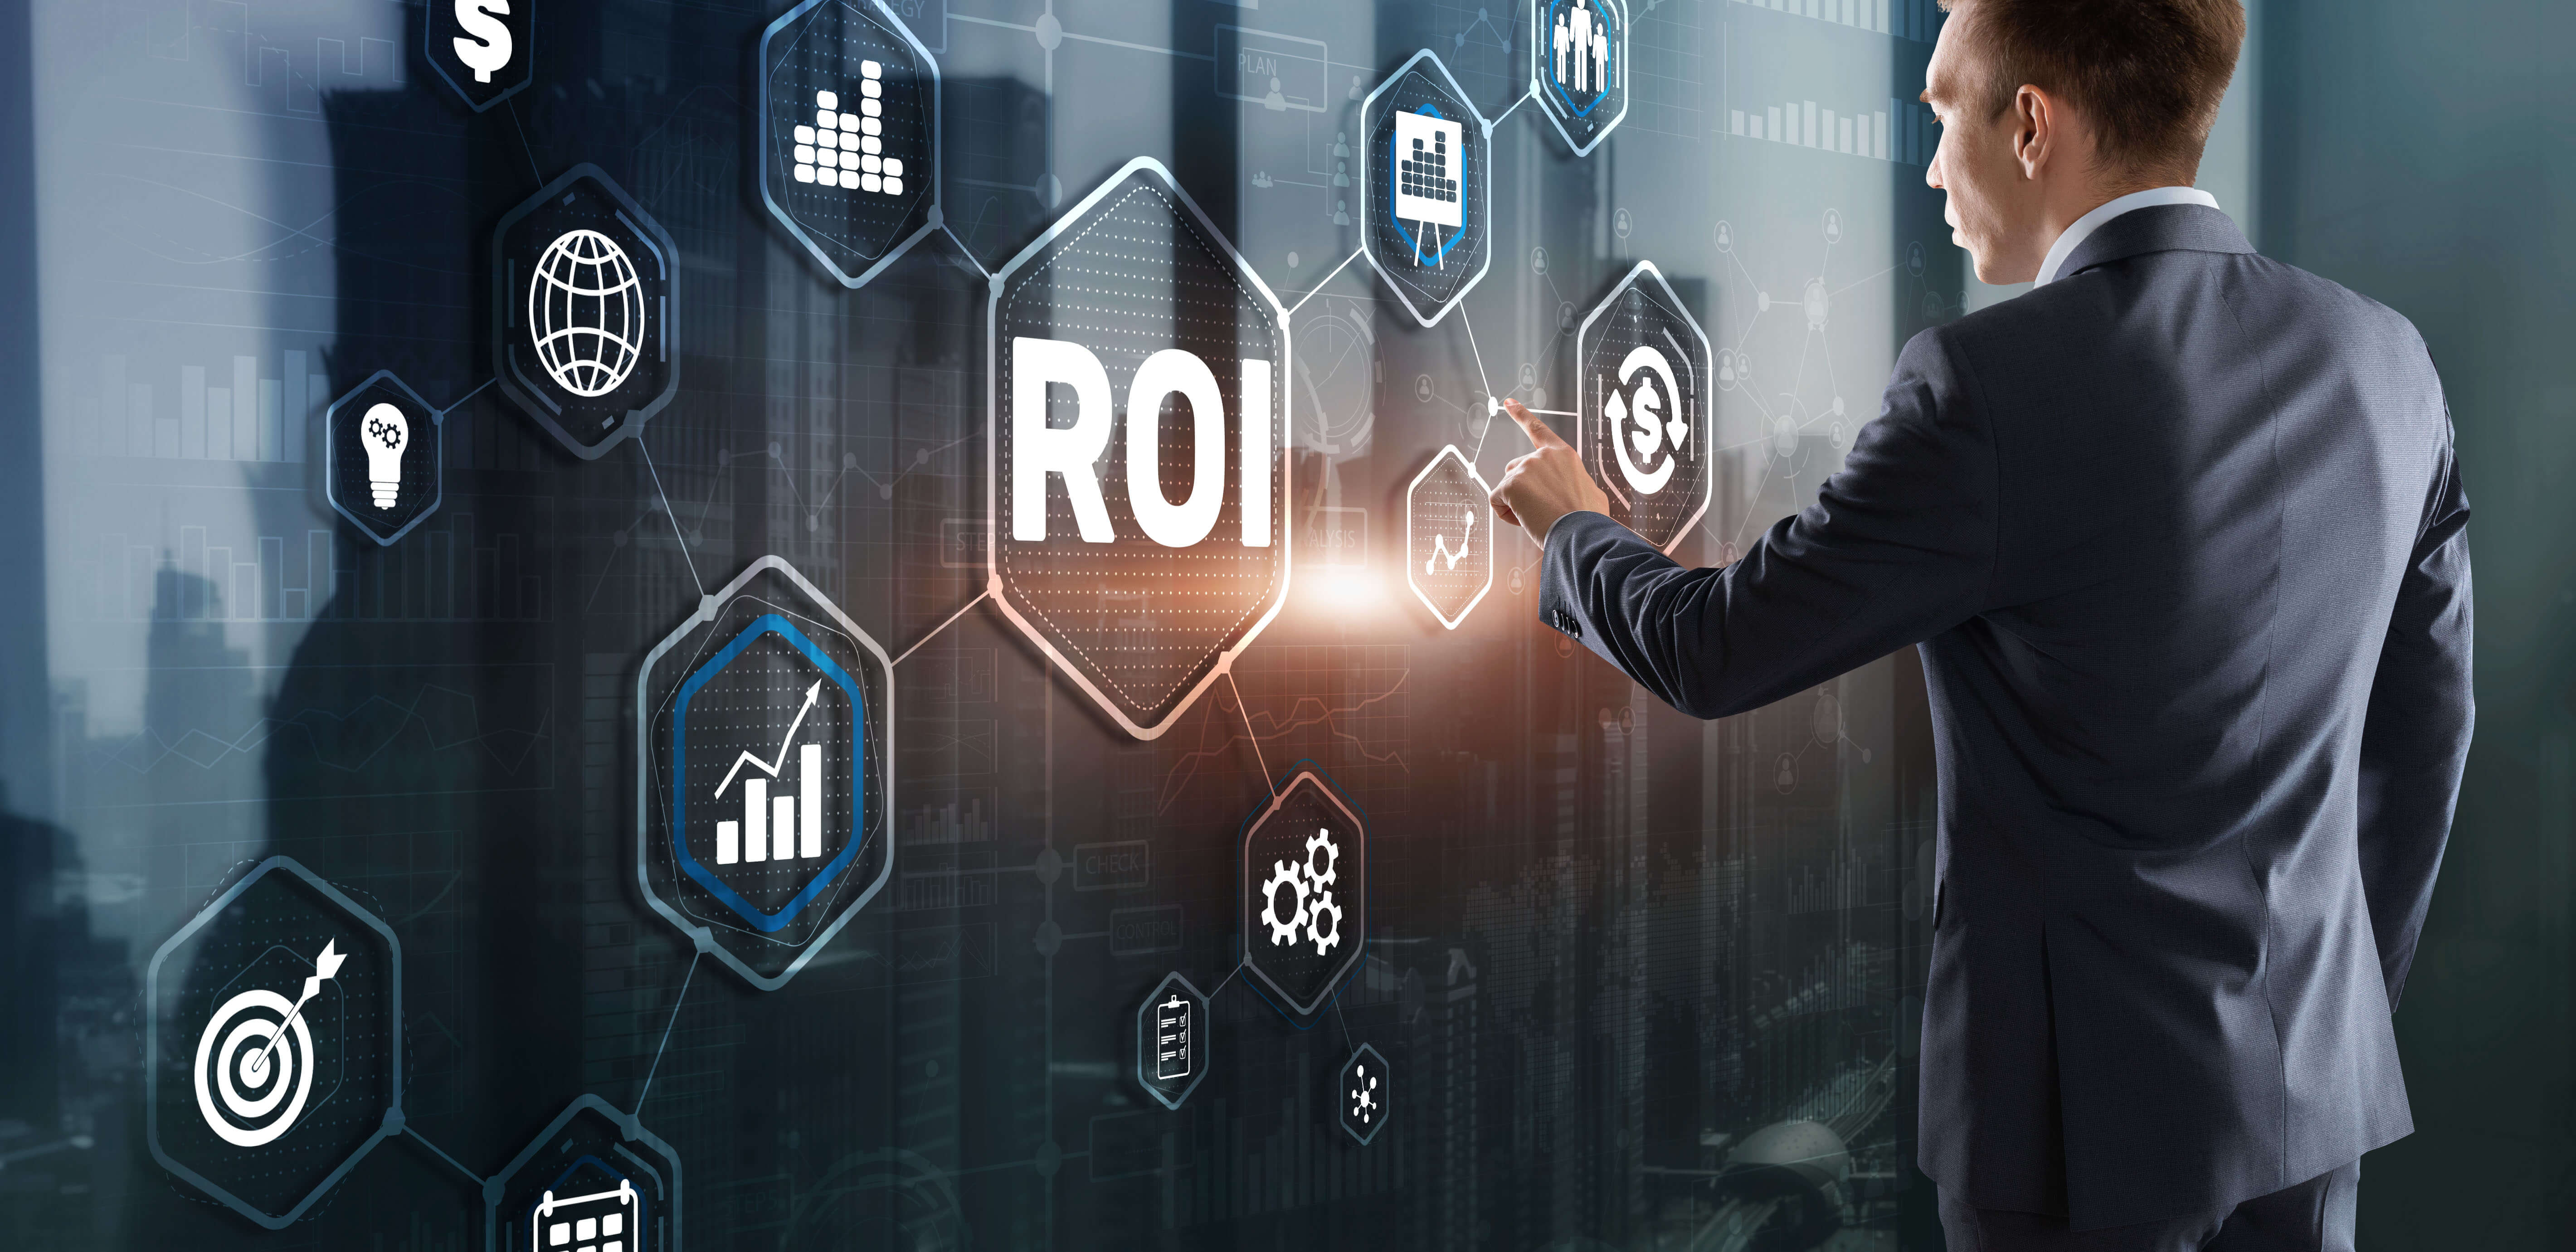 Roi Return Investment Business Technology Analysis Finance Concept (1)